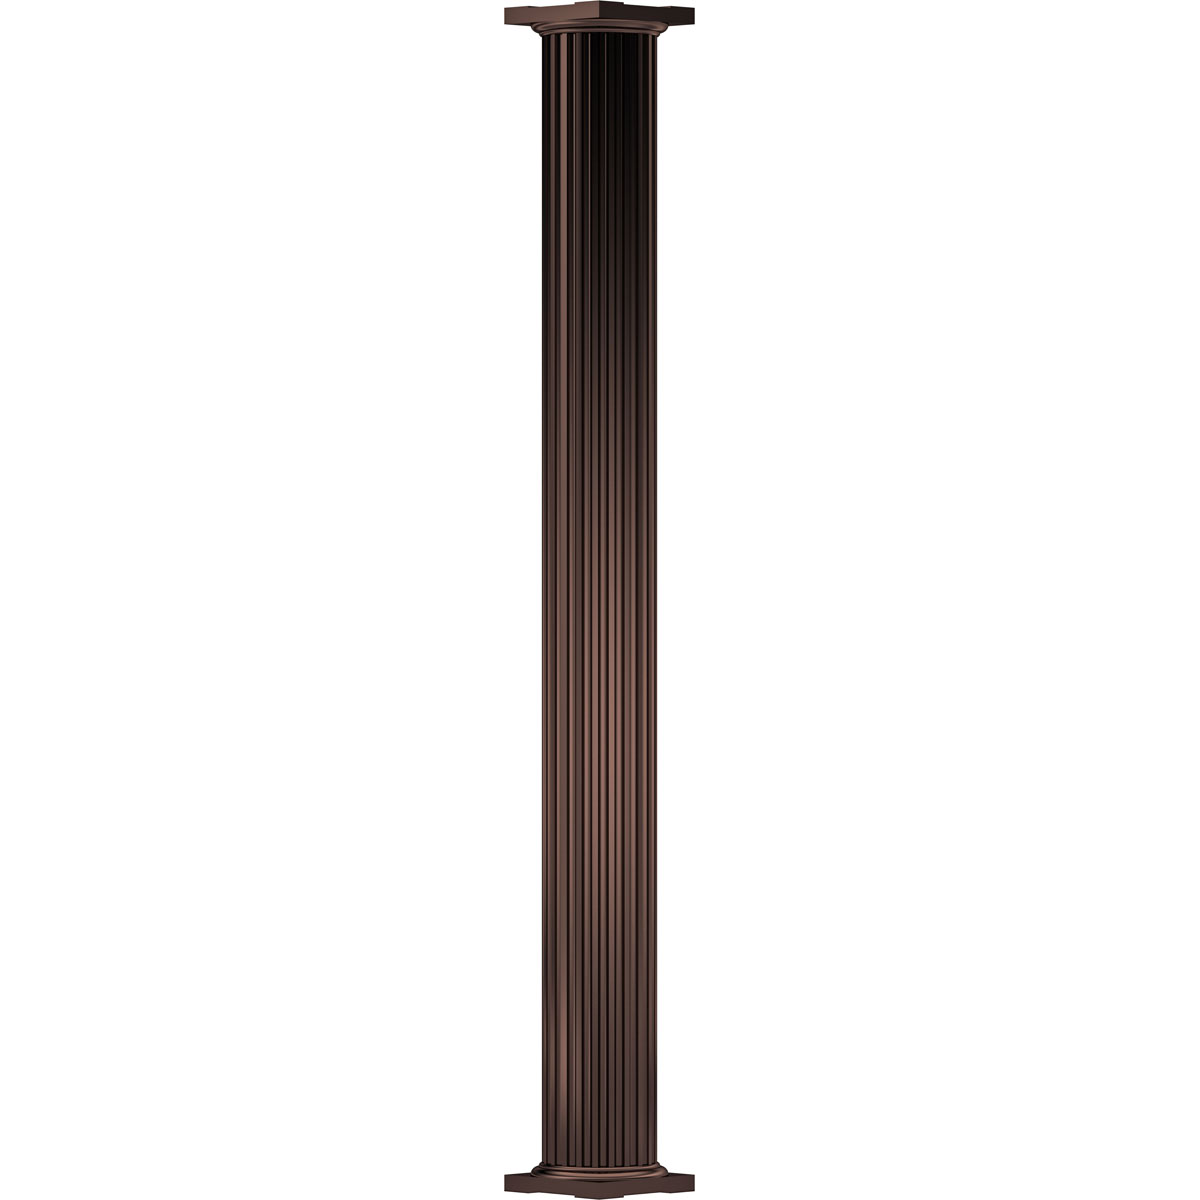 8-Inch x 16' Endura-Aluminum Column, Round Shaft (For Post Wrap  Installation), Non-Tapered, Fluted, Textured Bronze Finish w/ Capital & Base